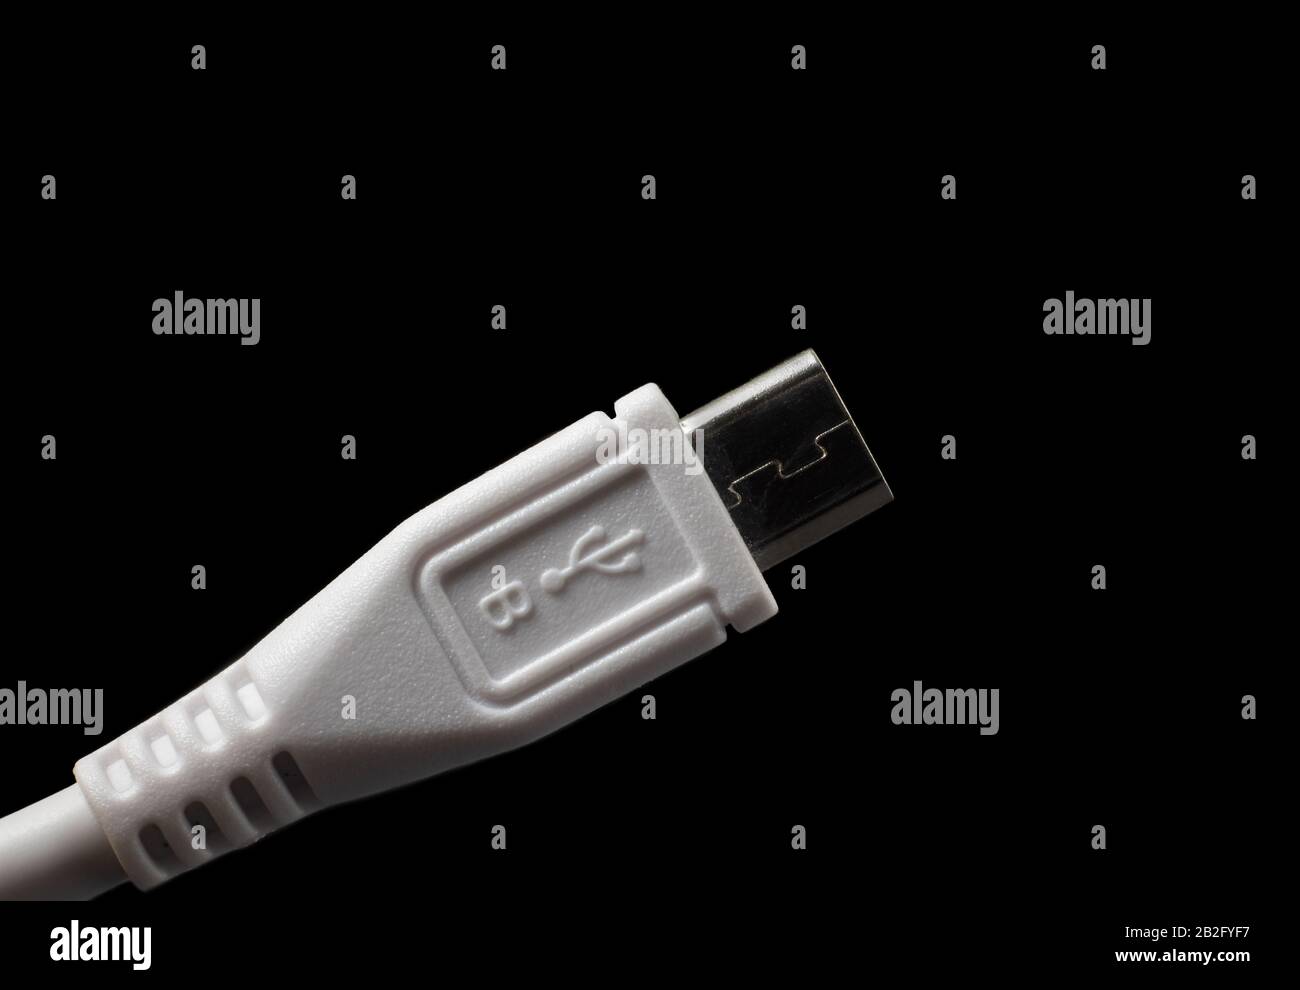 Micro USB type B plug with logo. Male connector isolated on black. Stock Photo